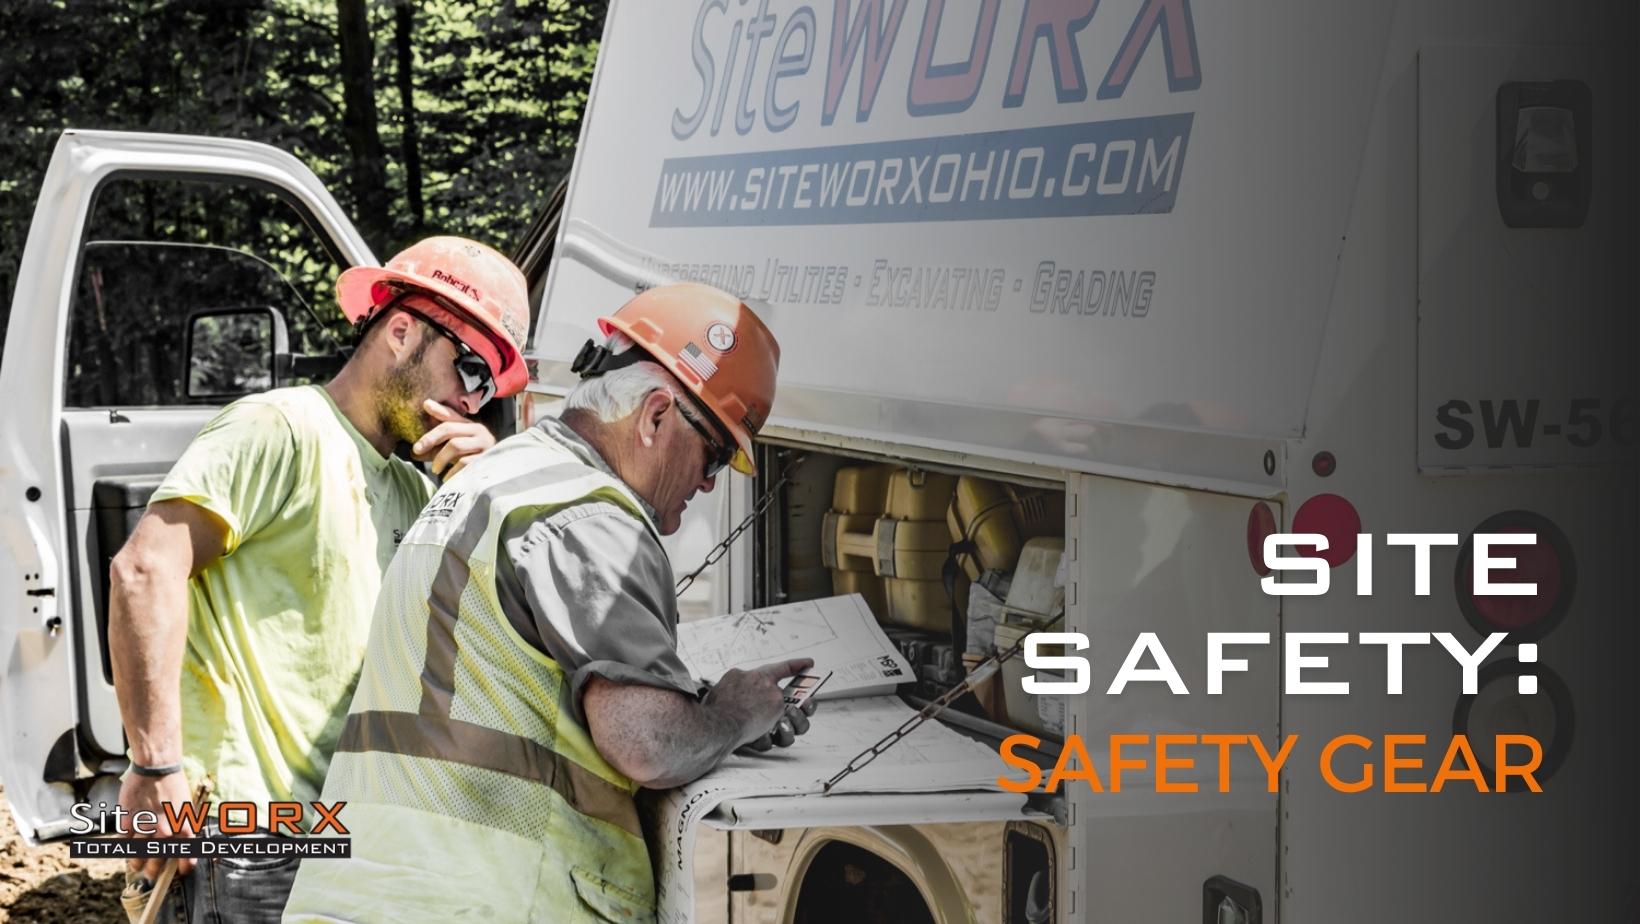 Two guys working near a truck, picture saying Site Safety: Safety Gear